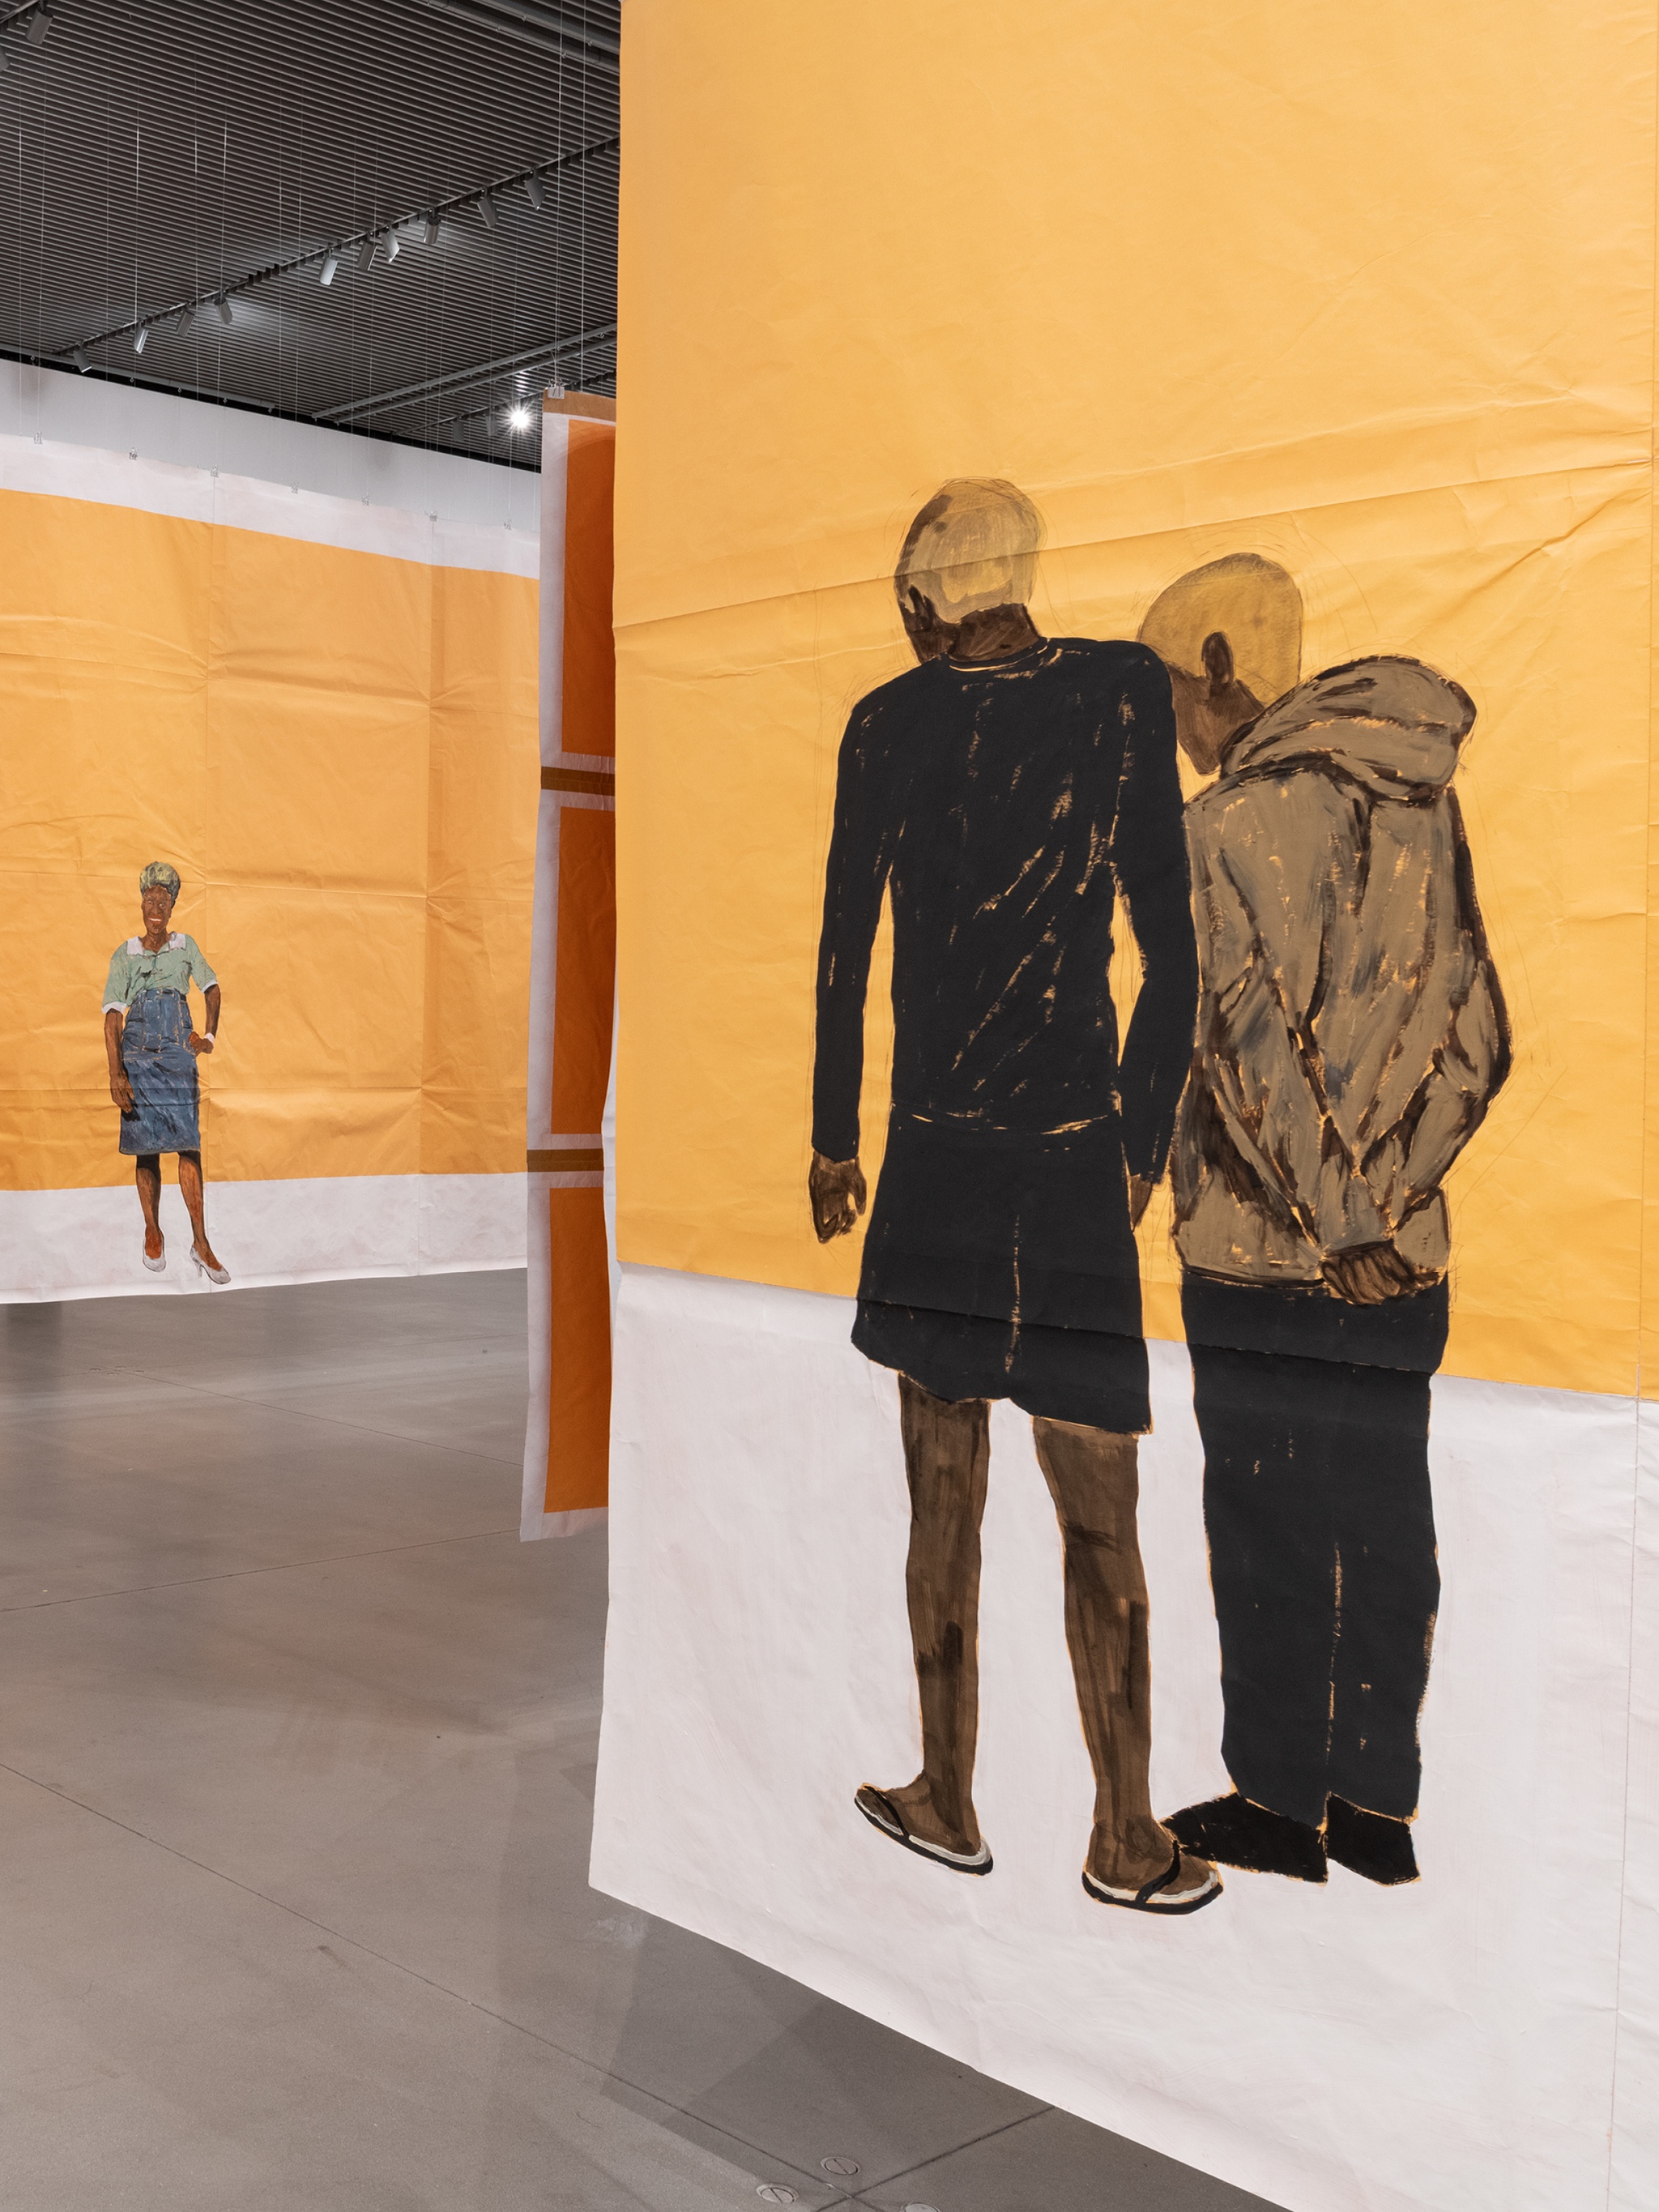 An art gallery with paintings on paper that hang from the ceiling to form passages. A corner formed by paintings reveals a painting of a Black woman posing against a yellow brown background. Another painting in the foreground shows two young Black men standing together with backs to the viewer. They both have blond hair.